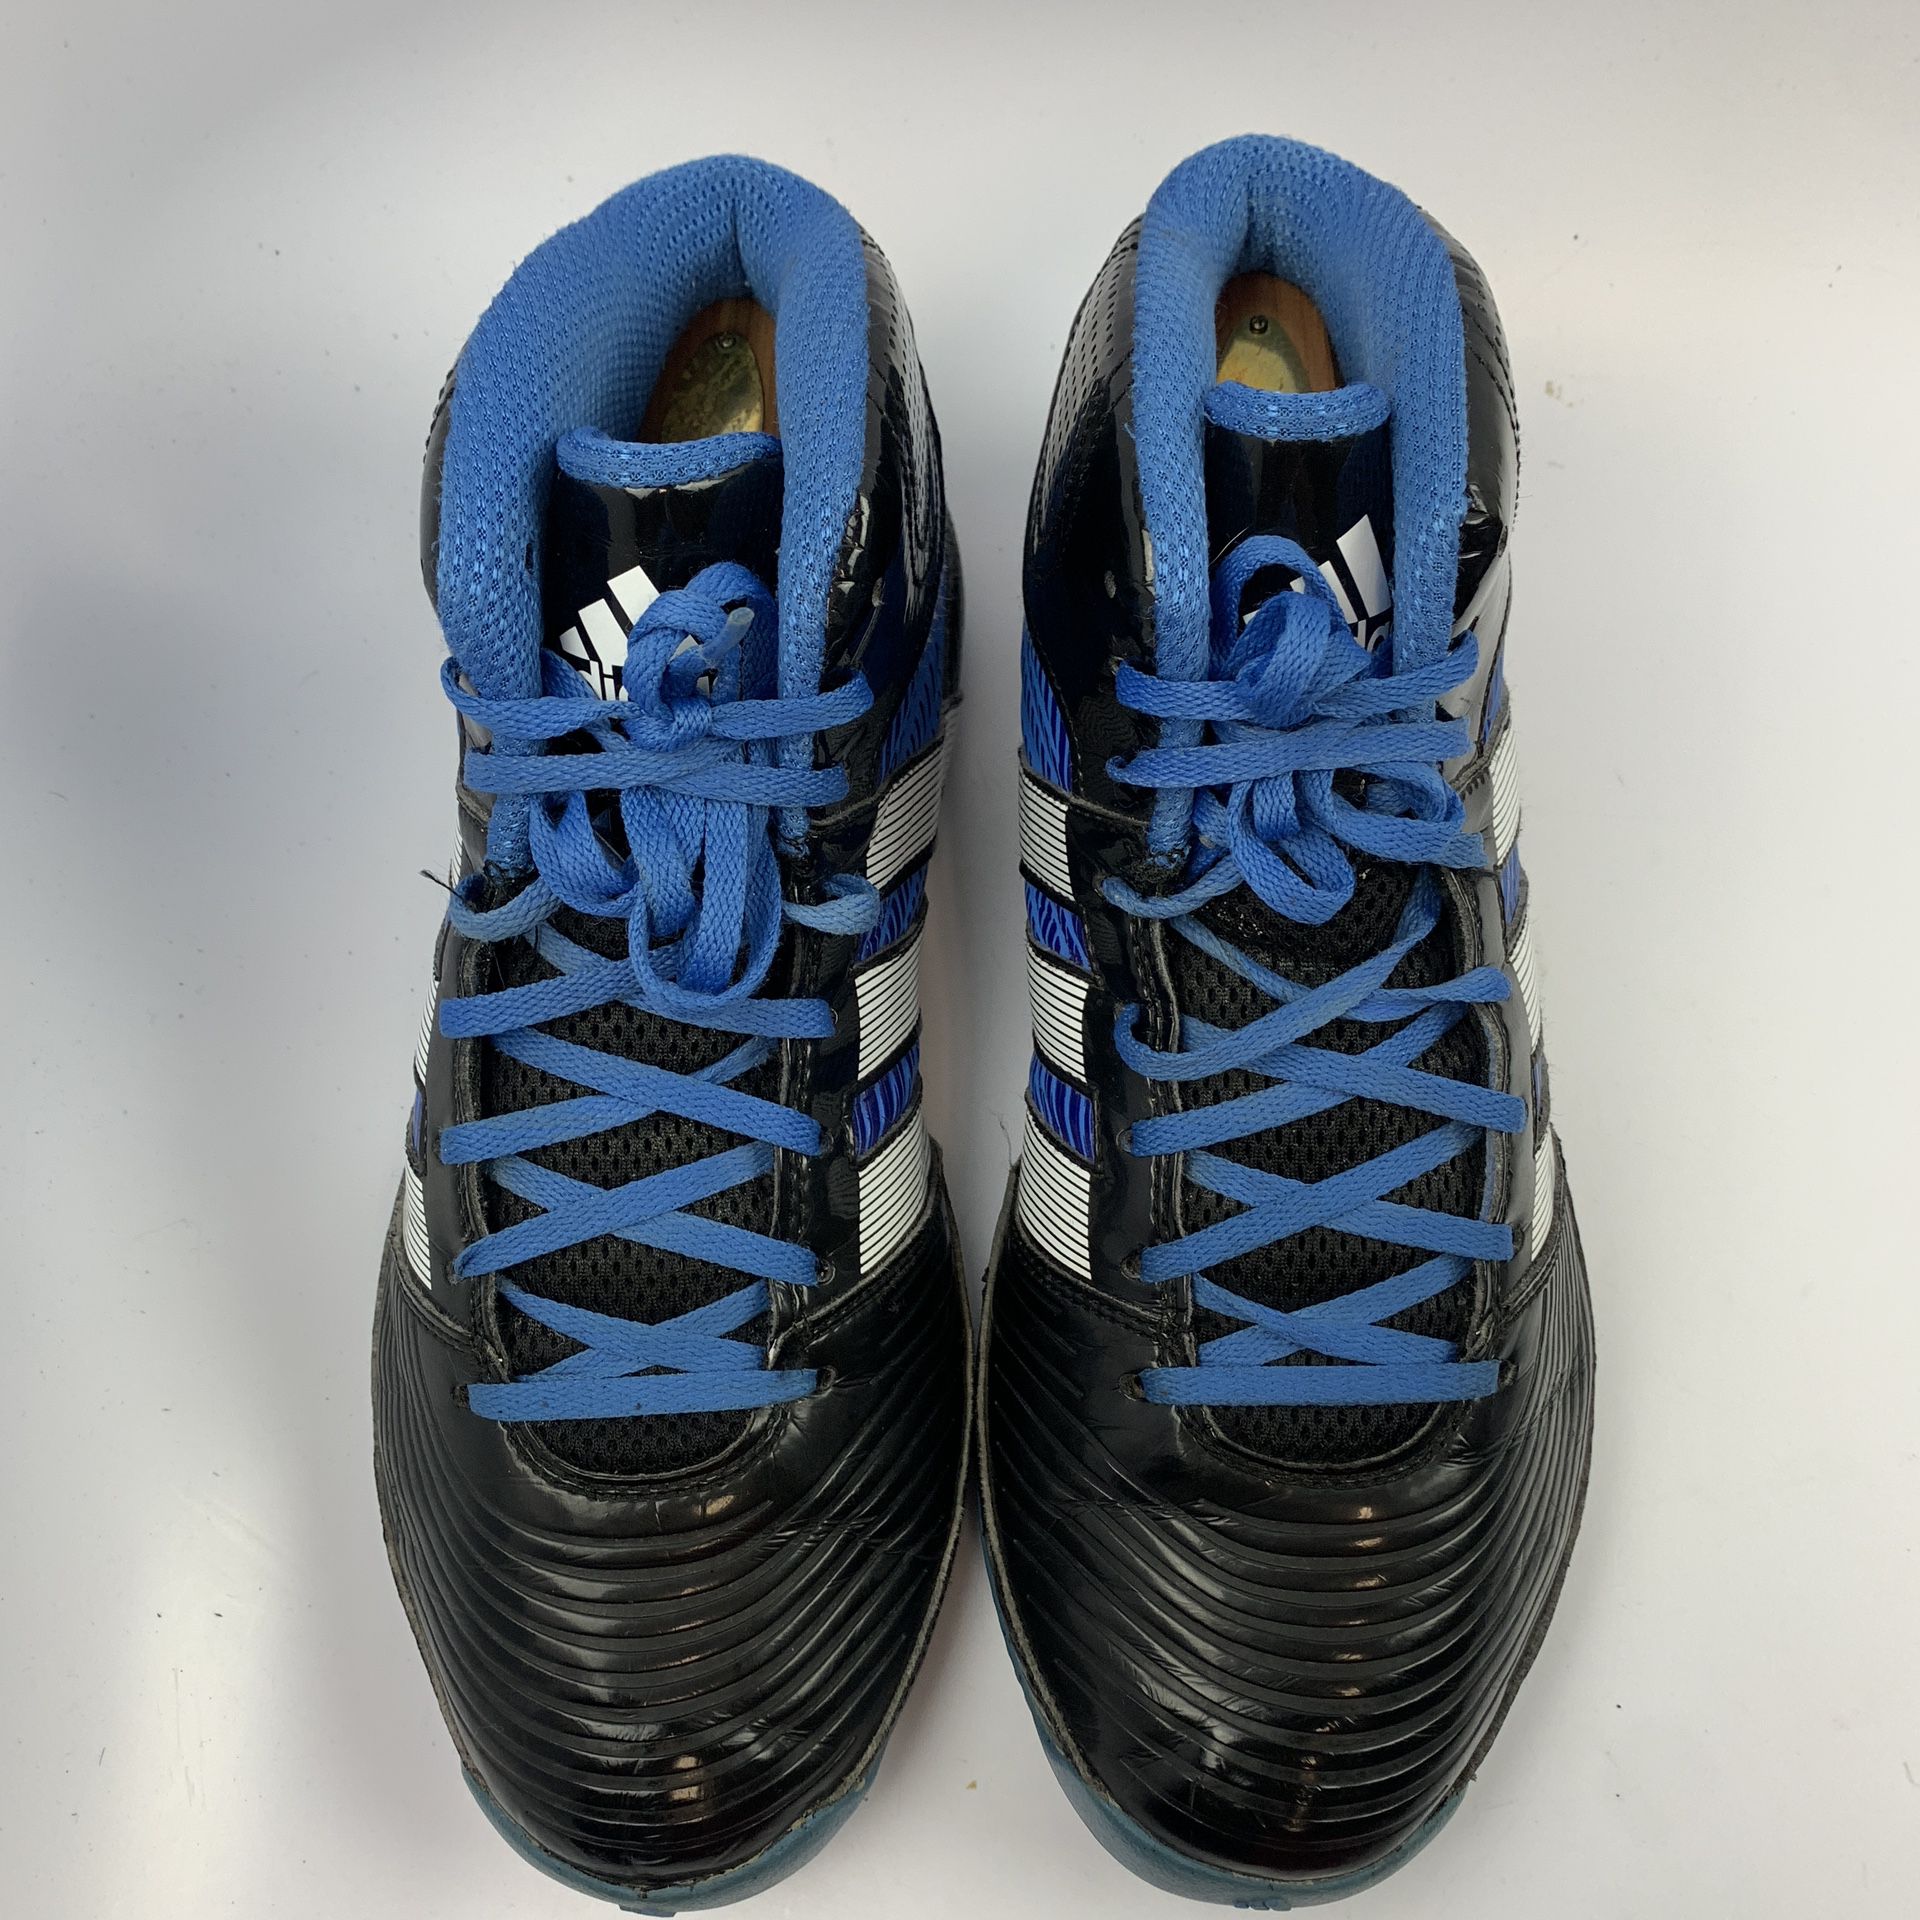 9 US / 8.5 UK Men Athletic Basketball Hi Tops Shoes Black Commander TD Plain Toe Lace up Striped SKU# B1300110 Shoes are used and show si for Sale TX - OfferUp